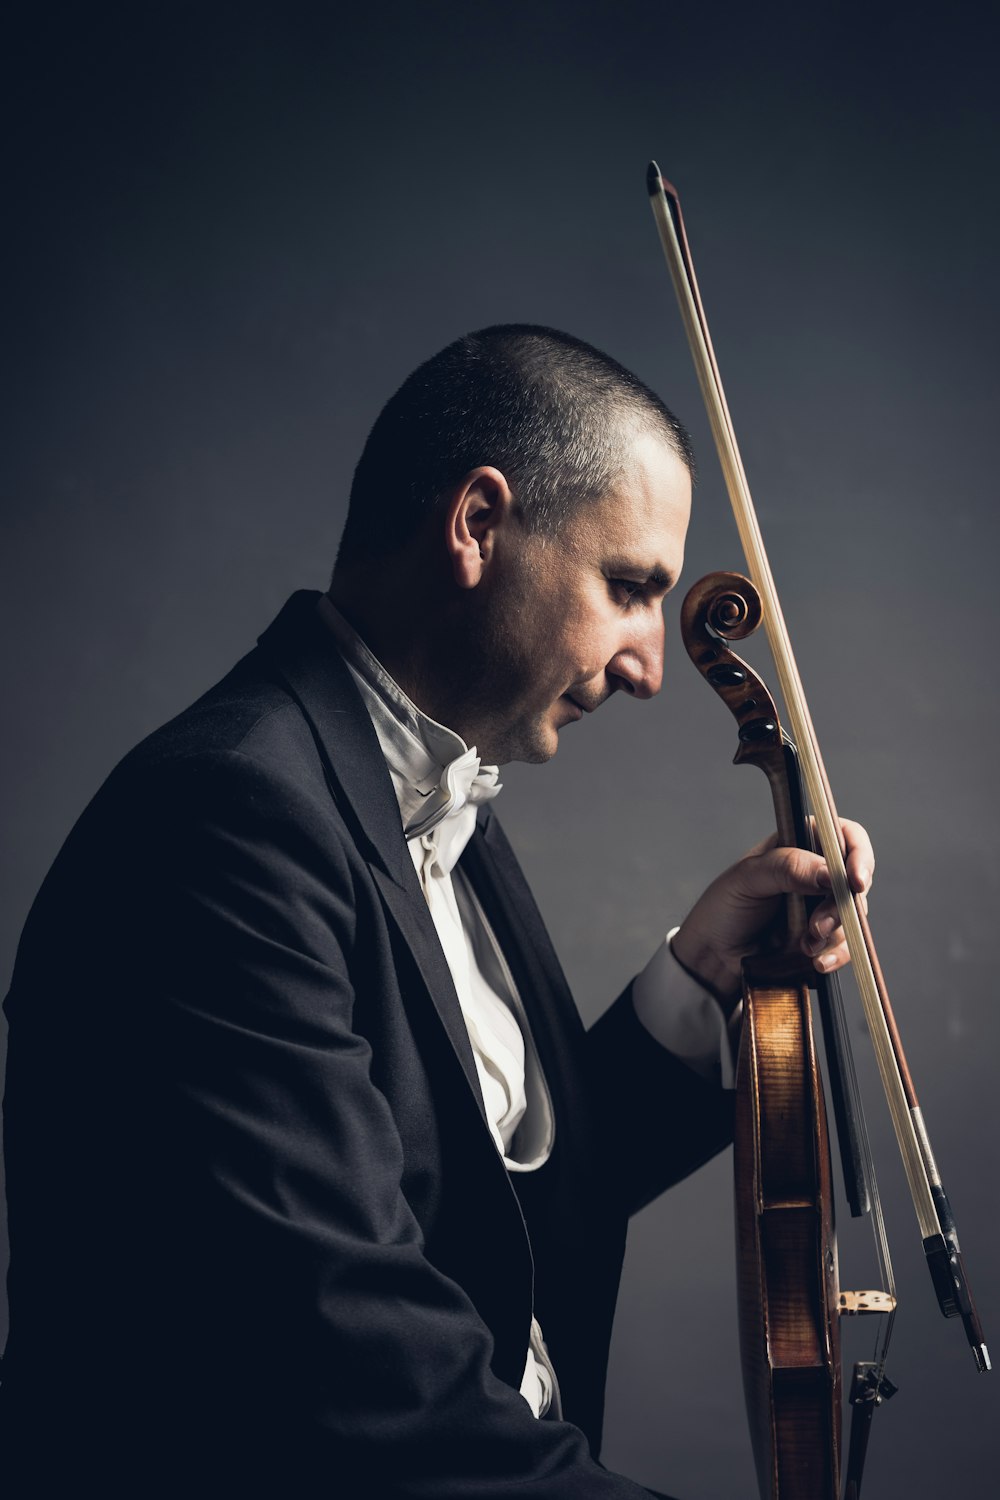 man holding violin and bow